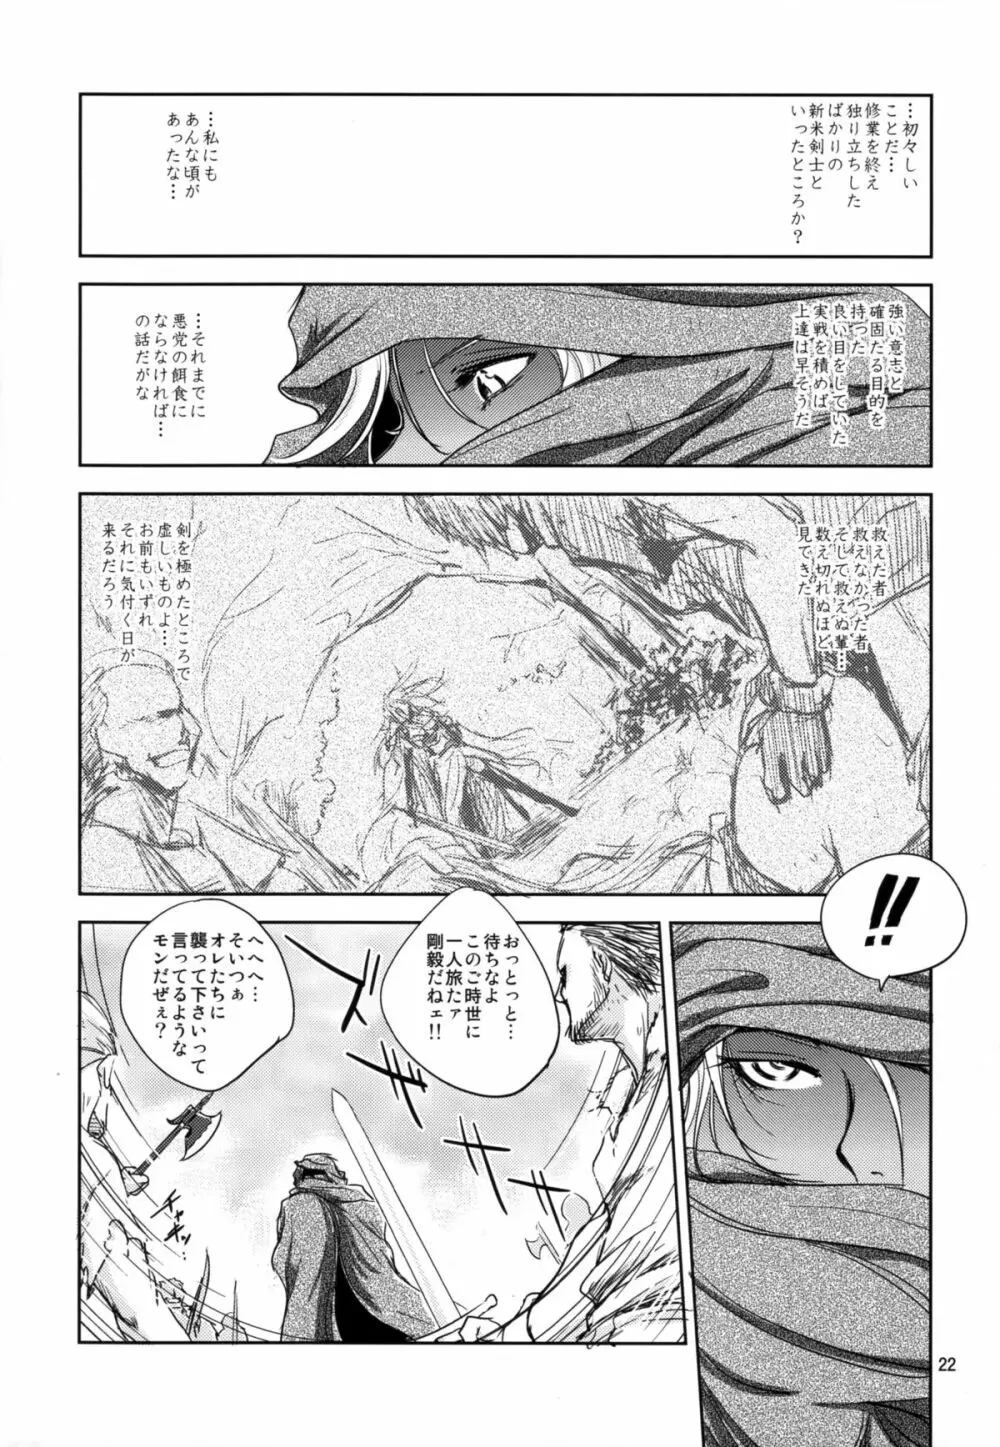 GRASSEN'S WAR ANOTHER STORY Ex #04 ノード侵攻 IV Page.22